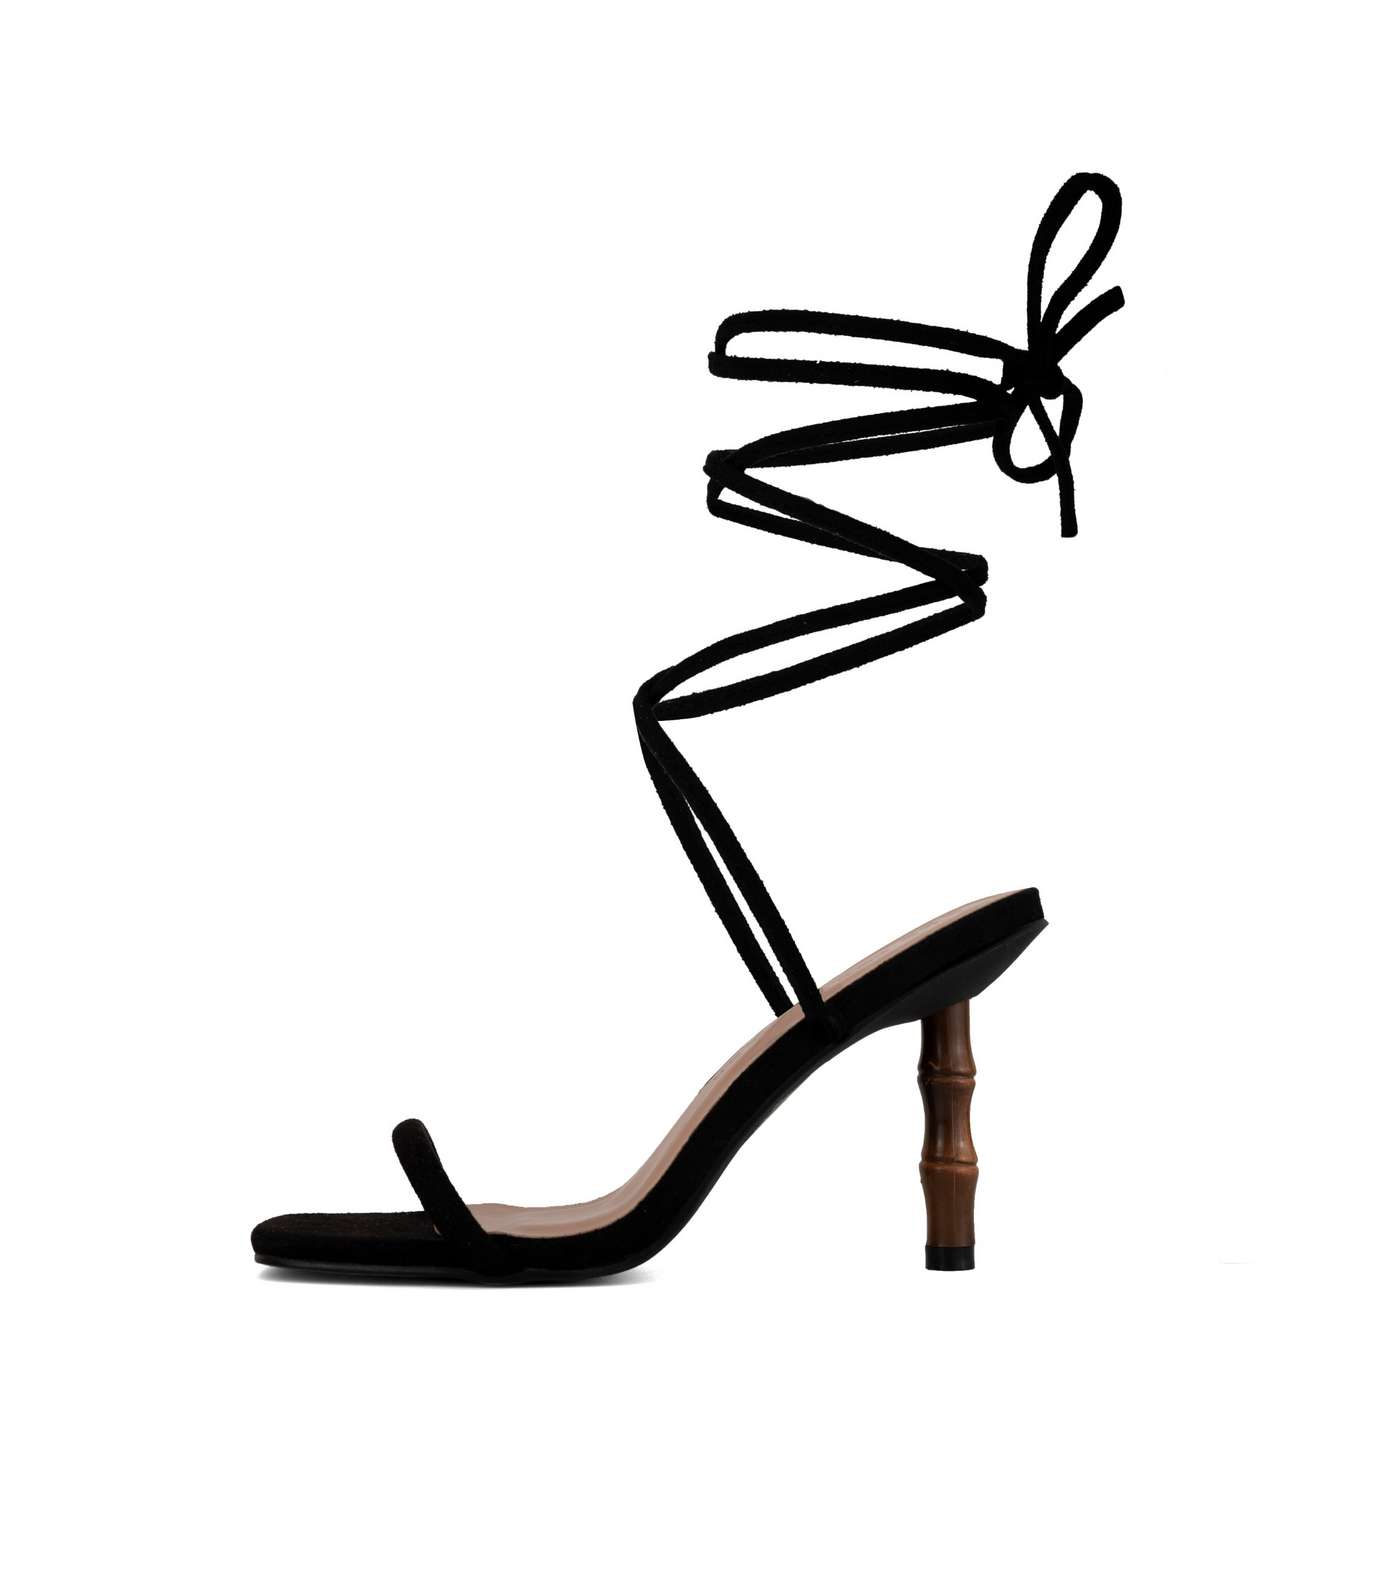 South Beach Black Tie Faux Bamboo Heel Sandals Image 2